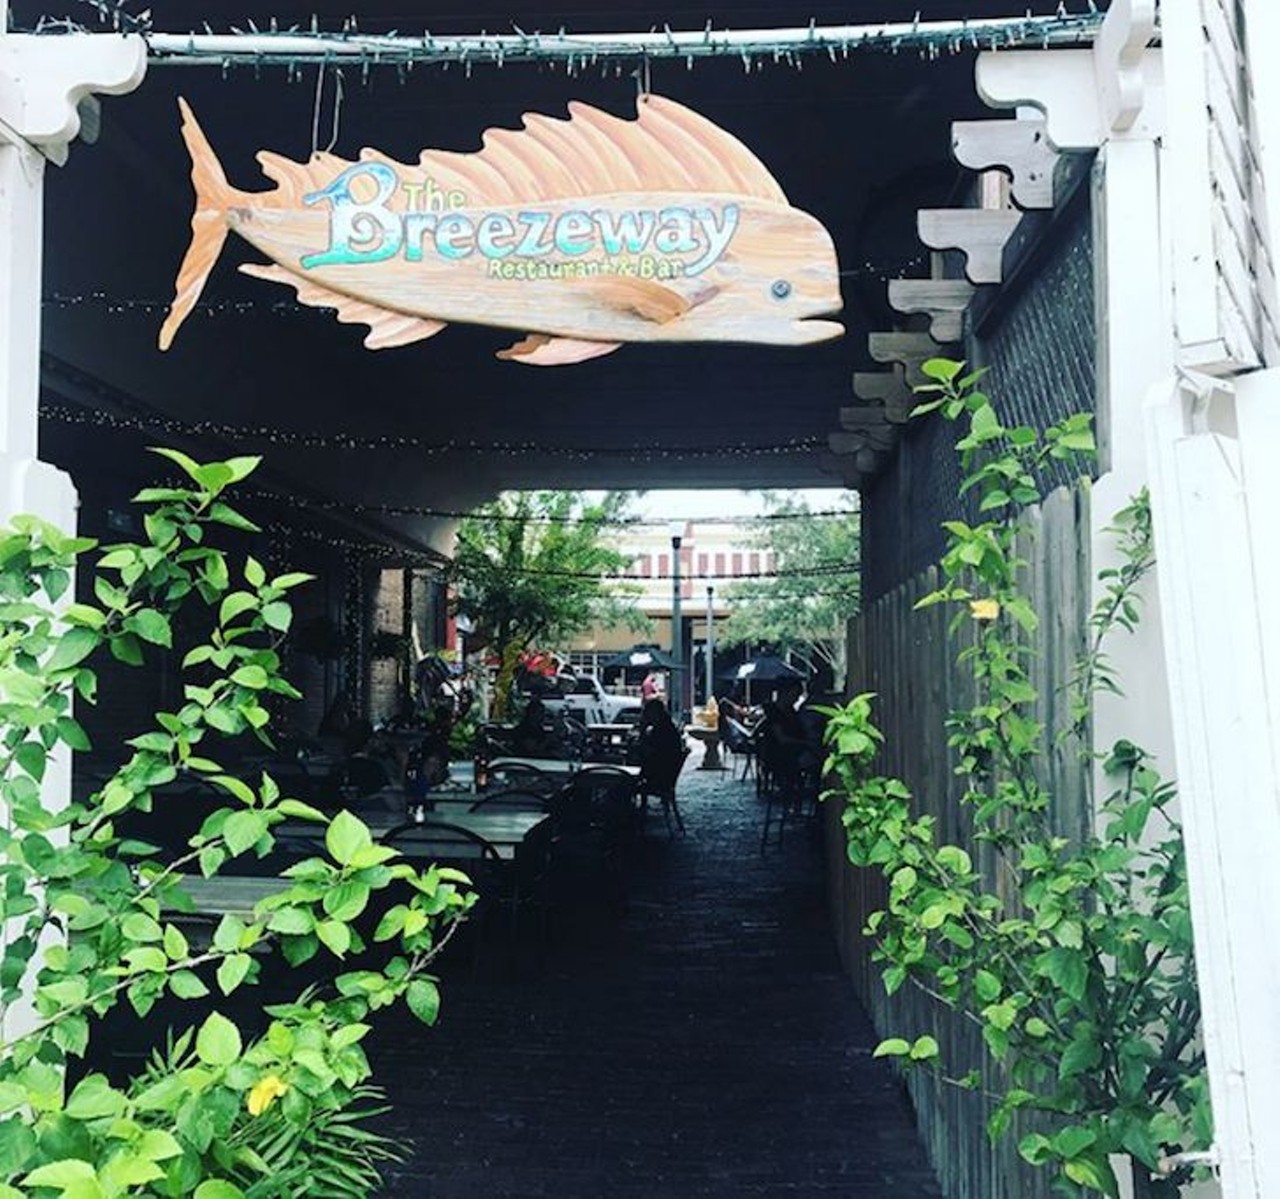 The Breezeway Restaurant & Bar
112 E. First St., Sanford, 407-878-1284,thebreezewayrestaurantandbar.com
Get your surf n&#146; turf fix at this casual eatery that serves up fresh seafood, steaks and everything in between.
Photo via mo0nchild__/Instagram